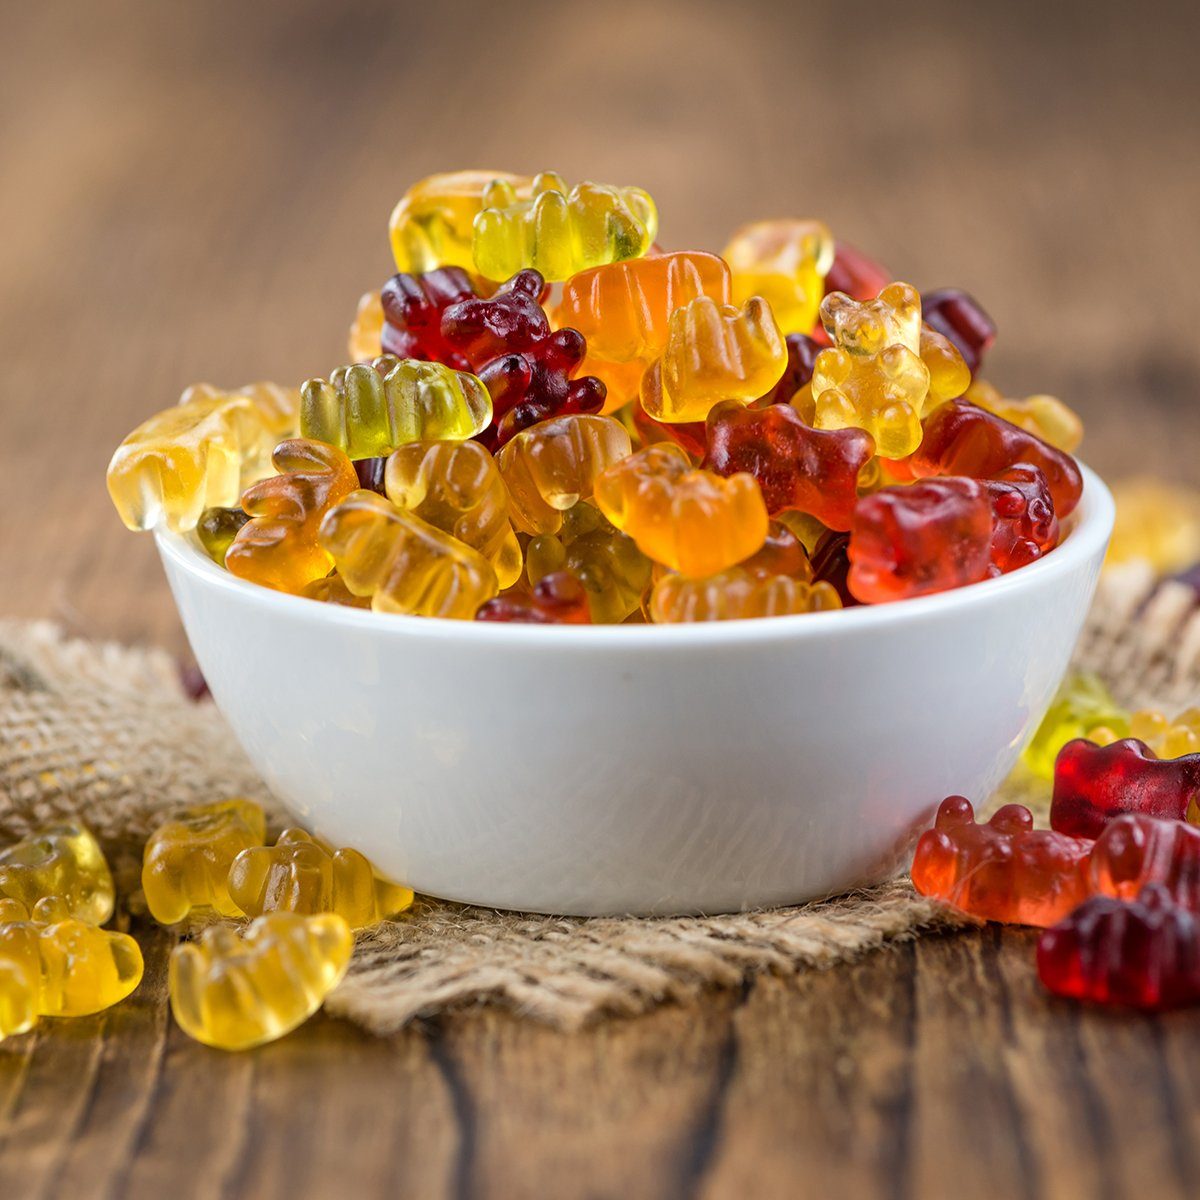 Fruity Gummy Bears (close-up shot) on an old wooden table